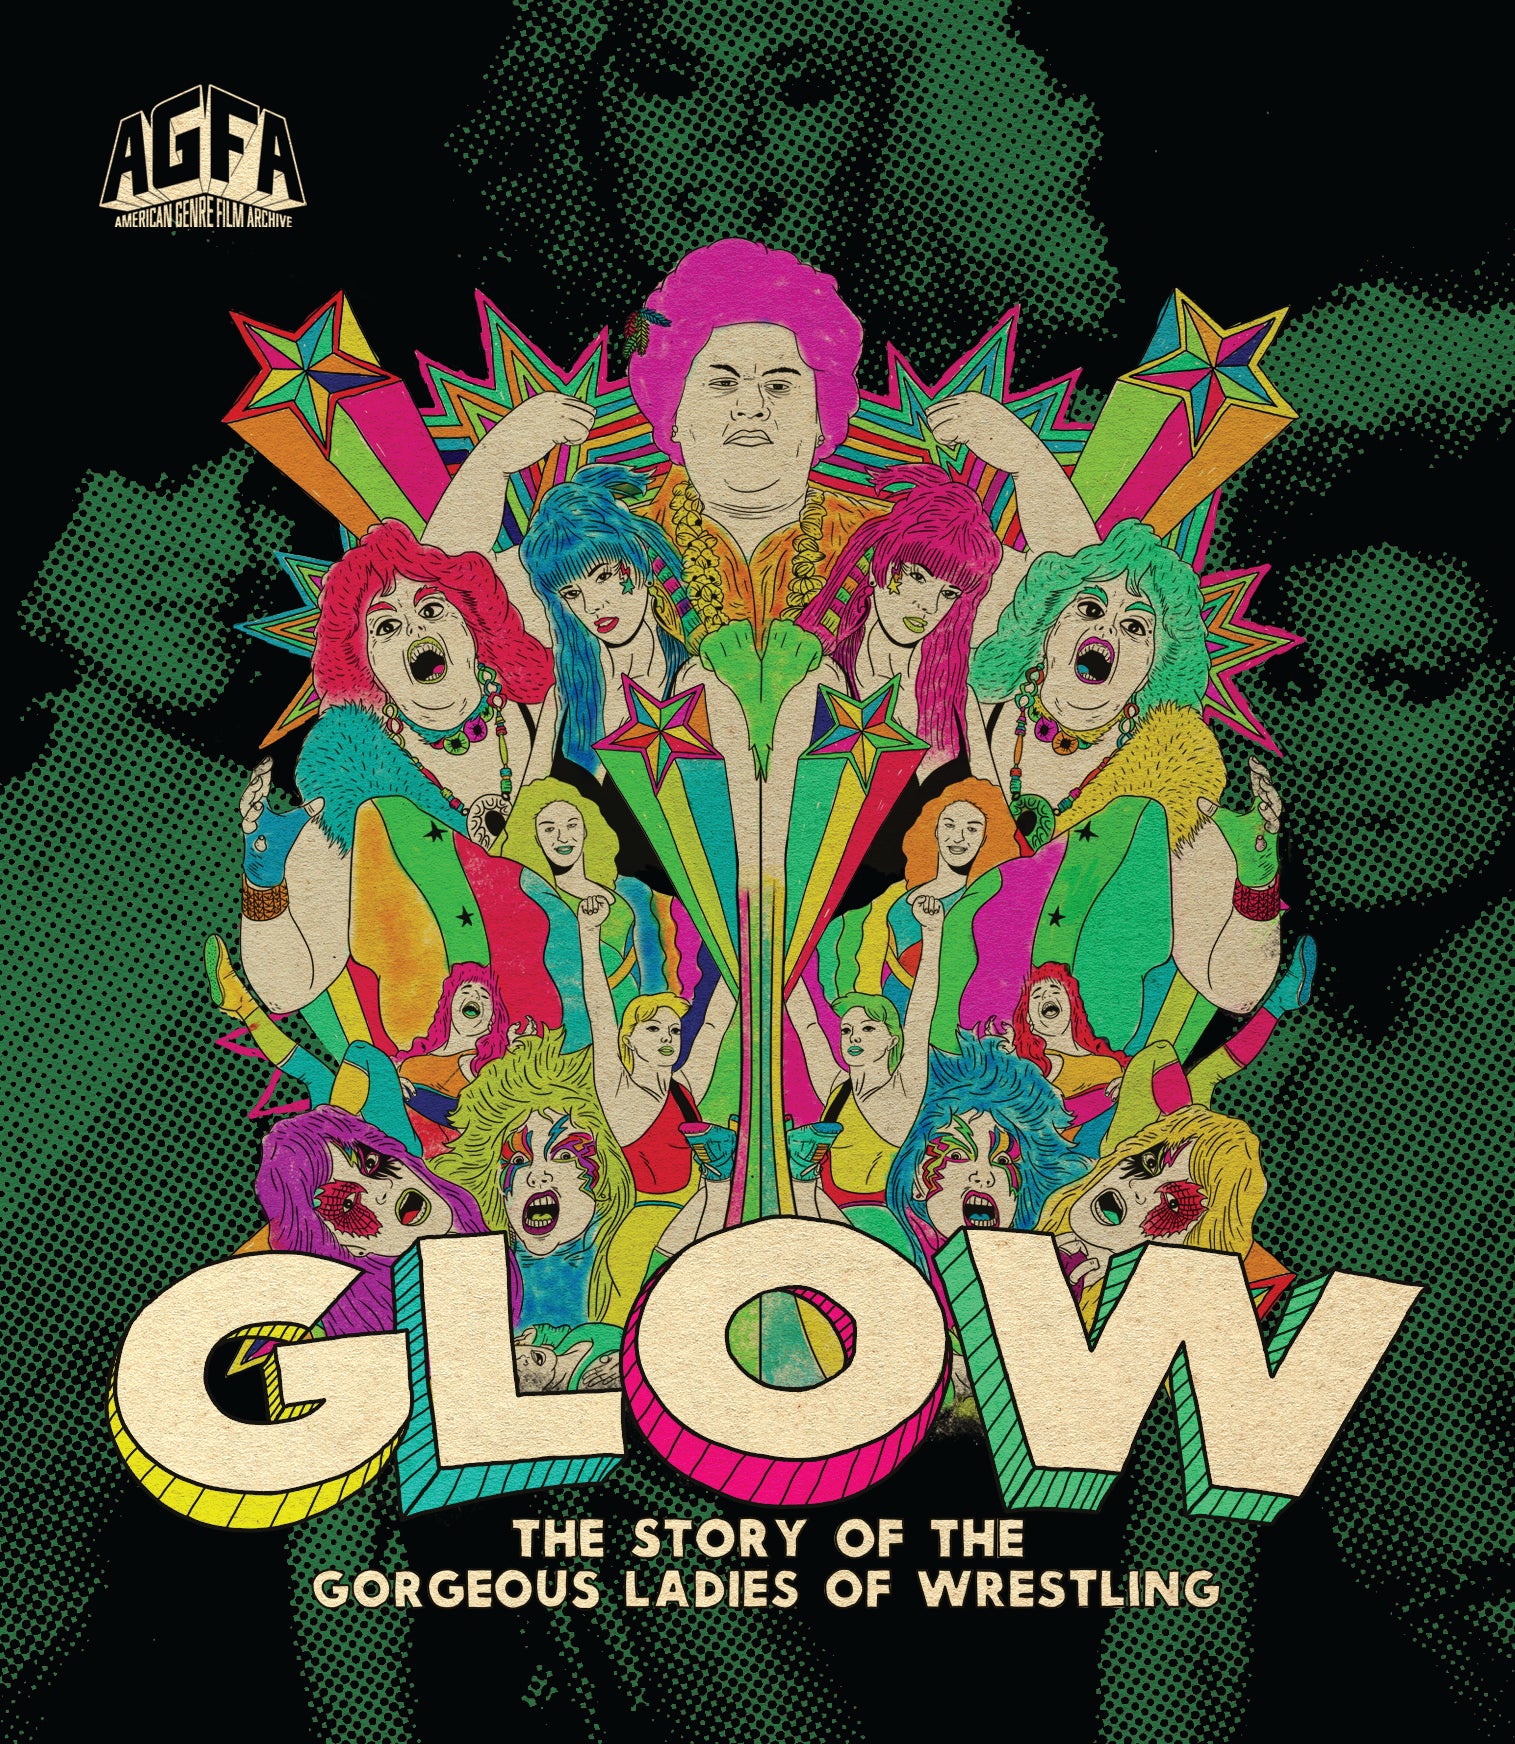 GLOW: THE STORY OF THE GORGEOUS LADIES OF WRESTLING (LIMITED EDITION) BLU-RAY